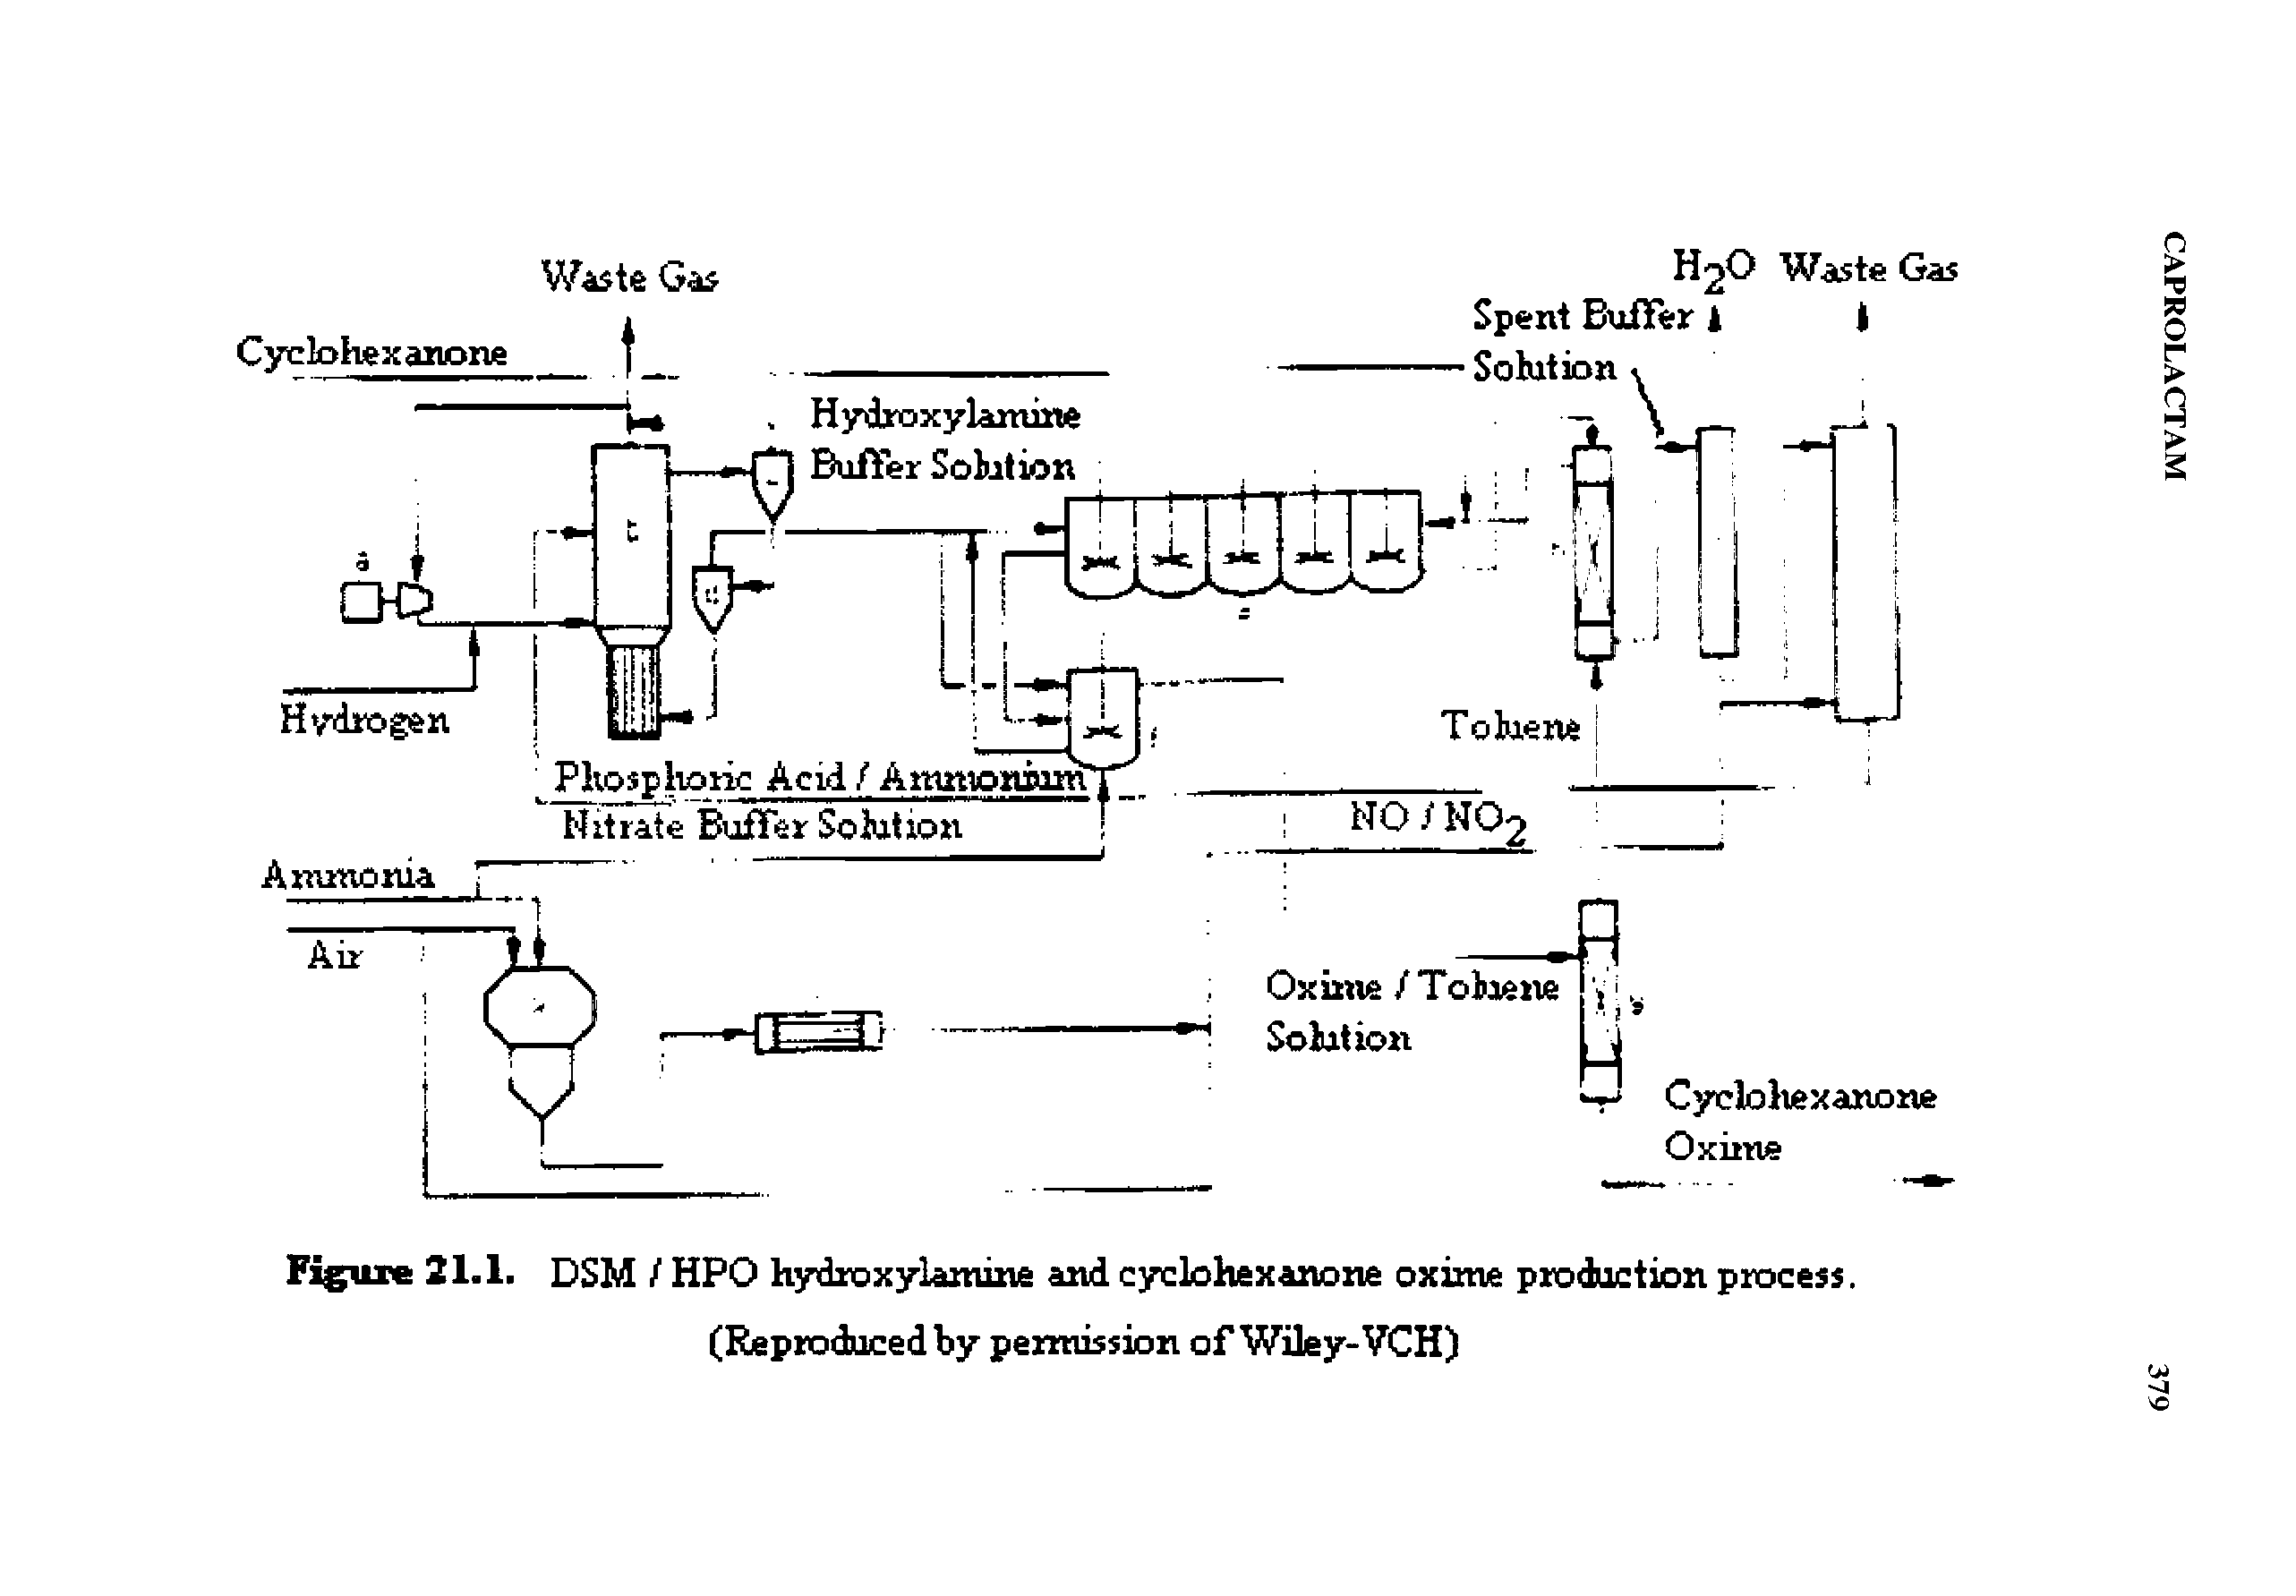 Figure 21.1. DSM / HPO hydro xylamme and cyclohexanone oxime production process.